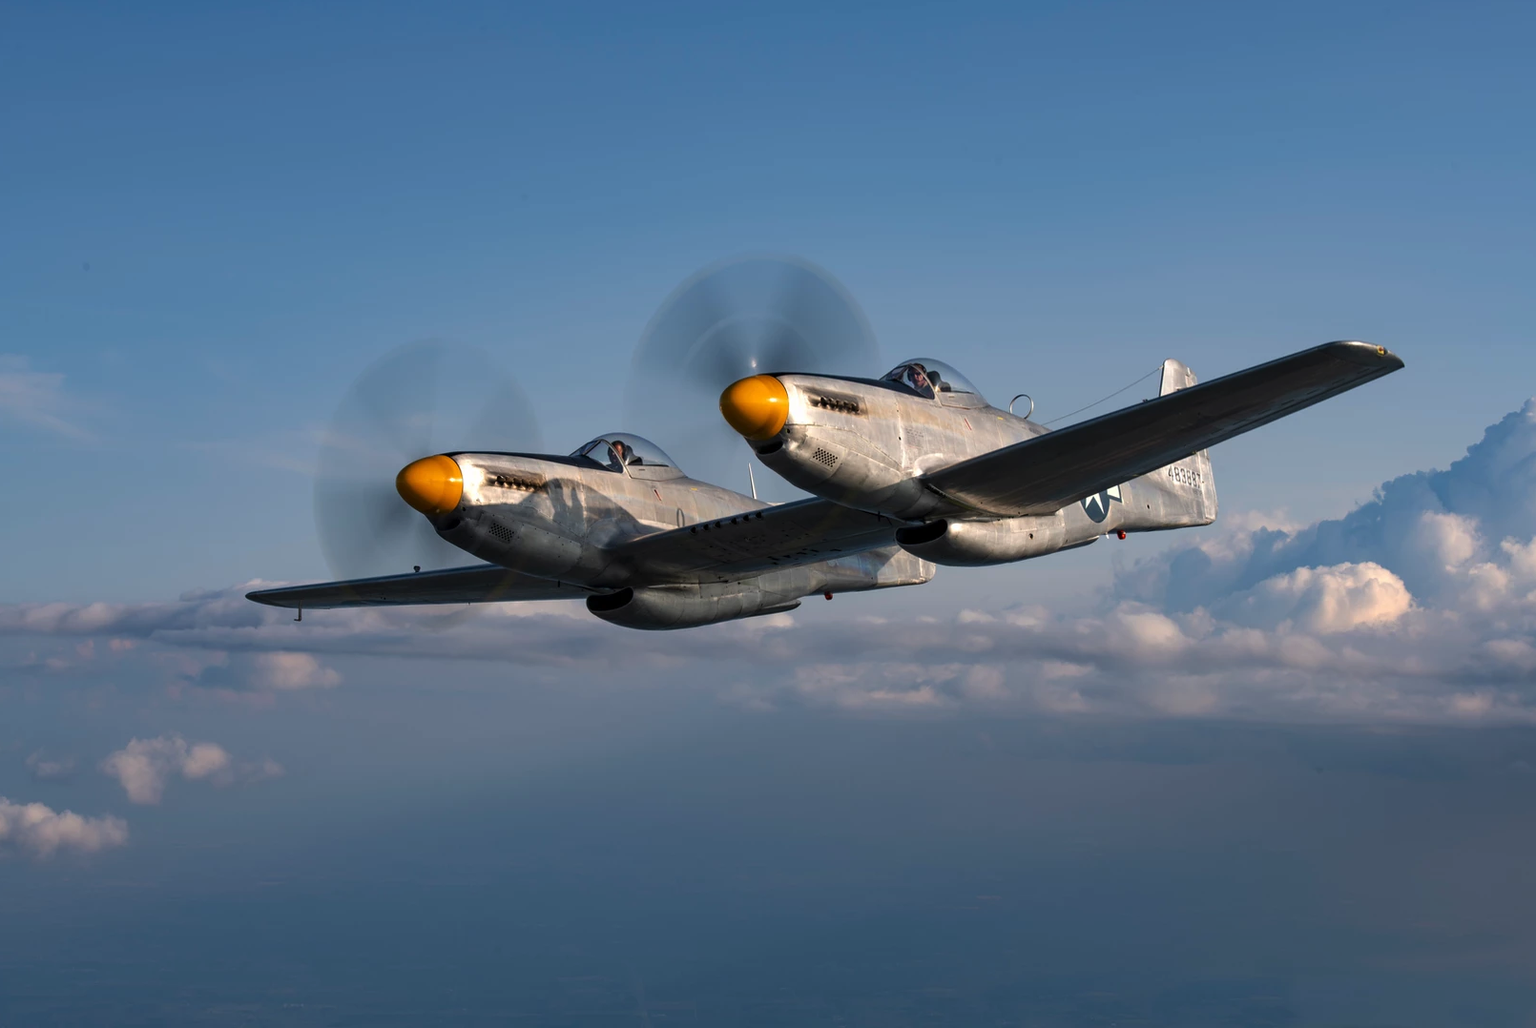 1944 North American XP-82
warbirds flugzeug history https://www.platinumfighters.com/inventory-2/1944-north-american-xp-82-